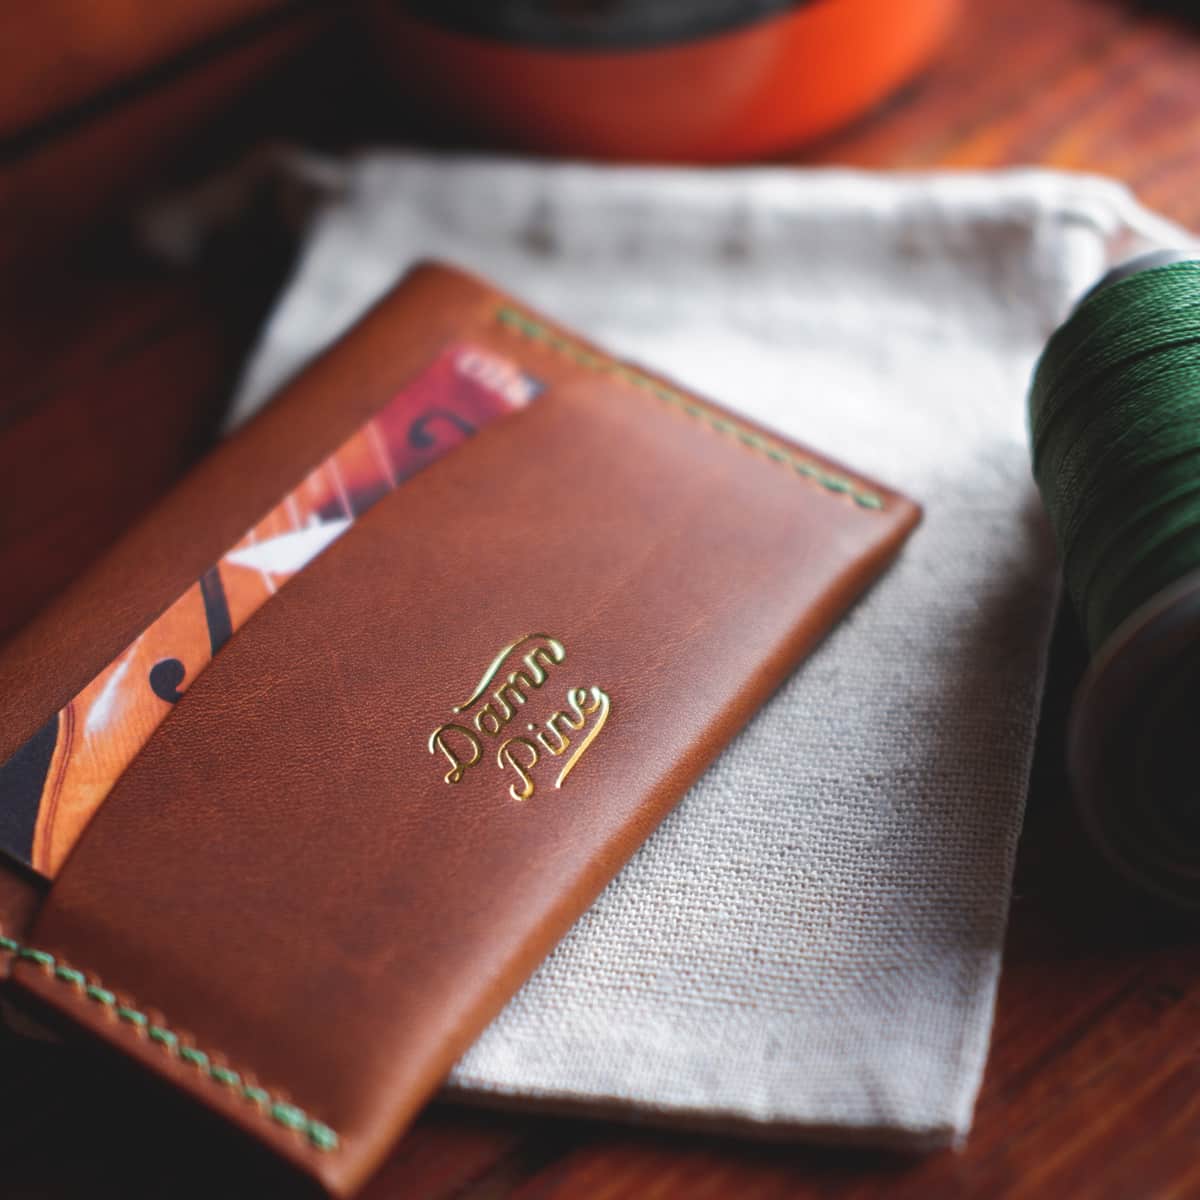 Closeup of The Mountain Card Wallet with Damn Pine Leather Goods logo